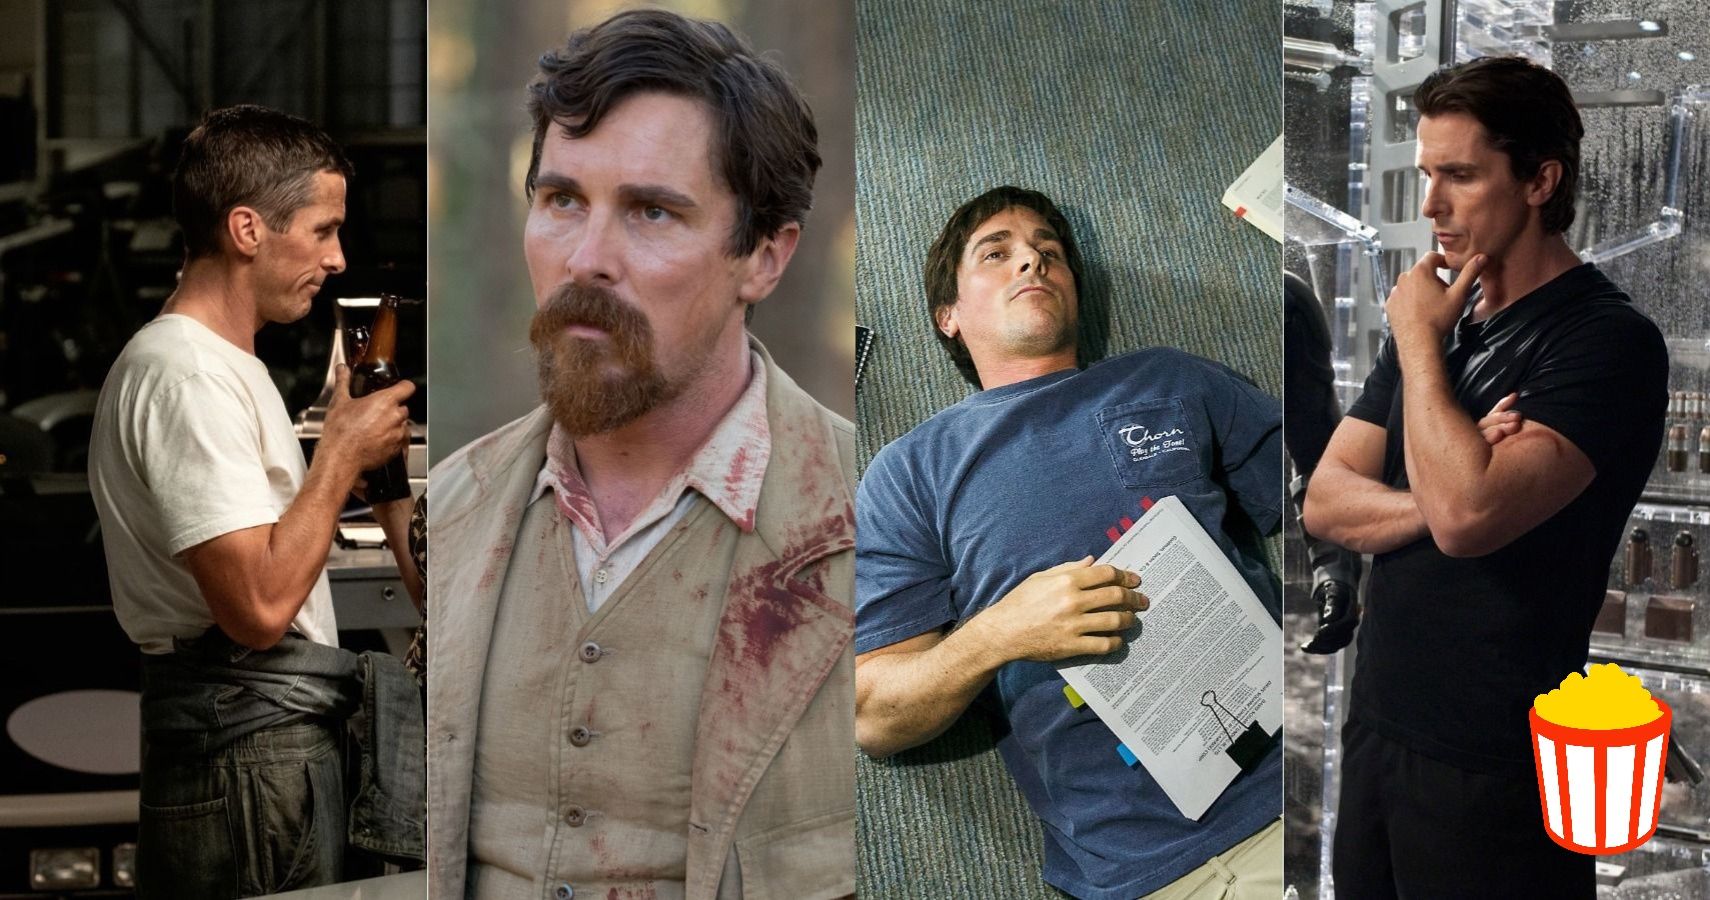 Christian Bale His Top 10 Movies According To Rotten Tomatoes Audience Score